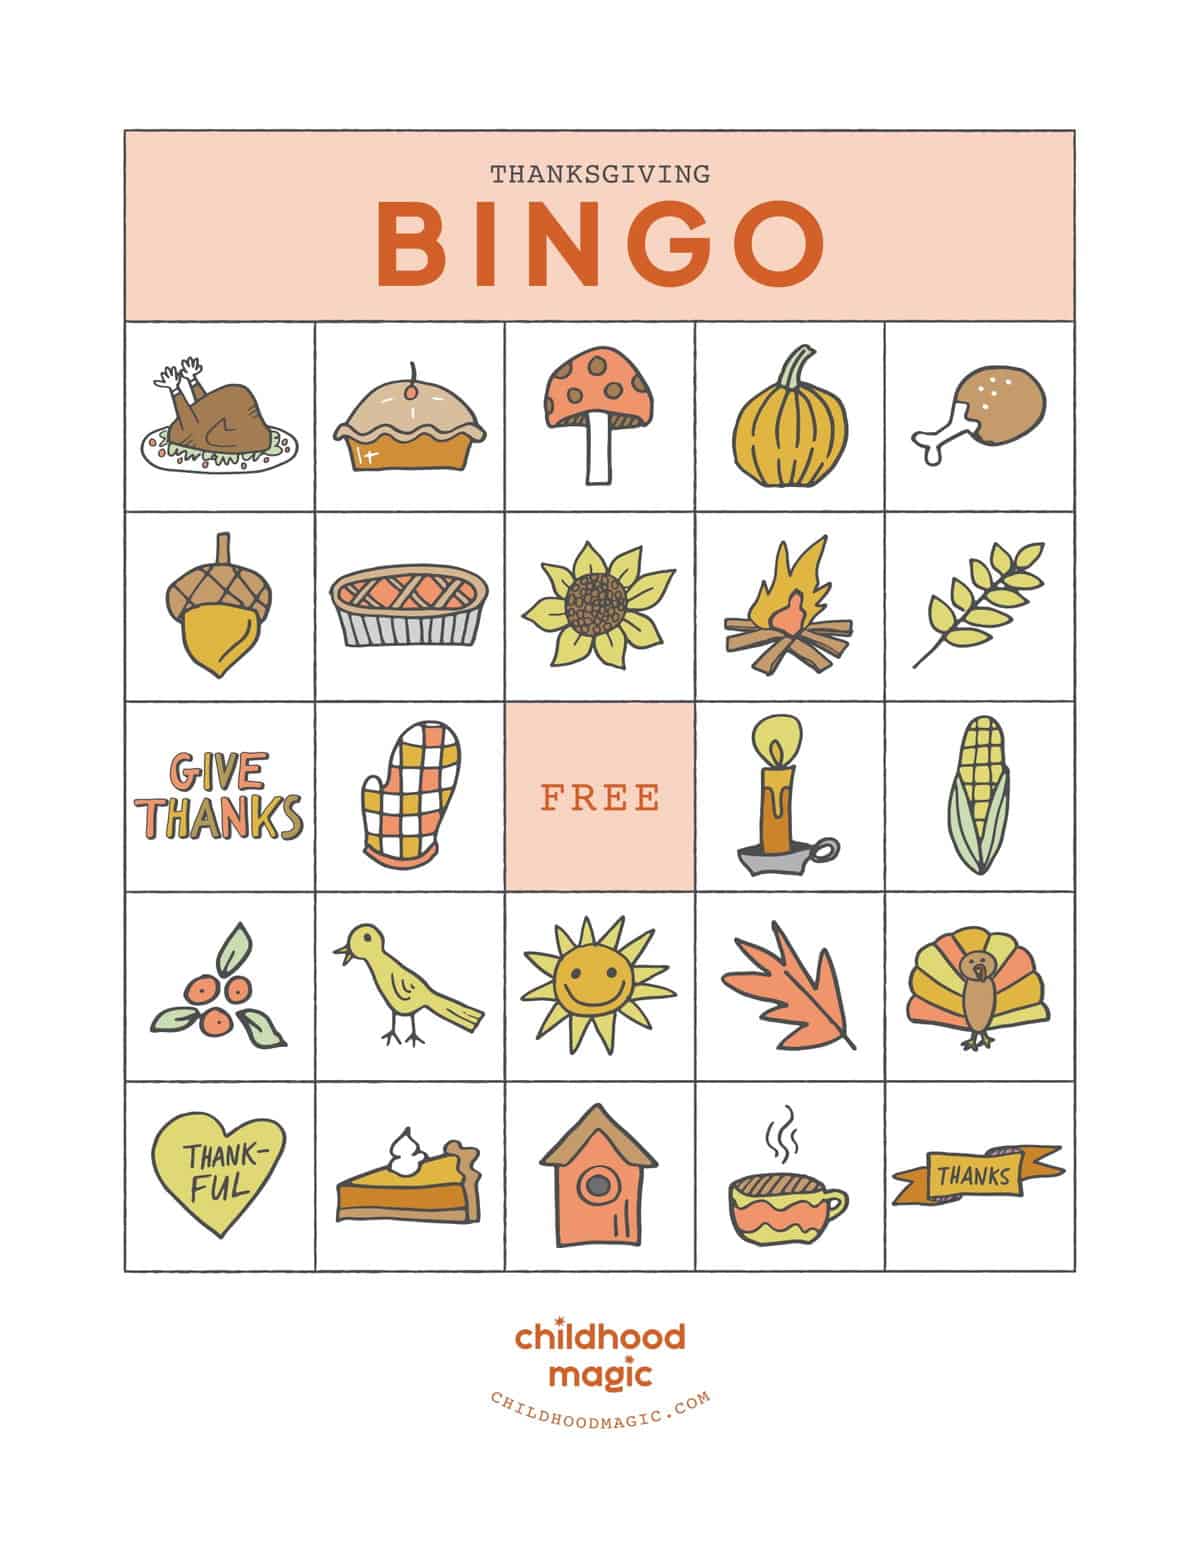 Thanksgiving themed Bingo card in full color for printing. 